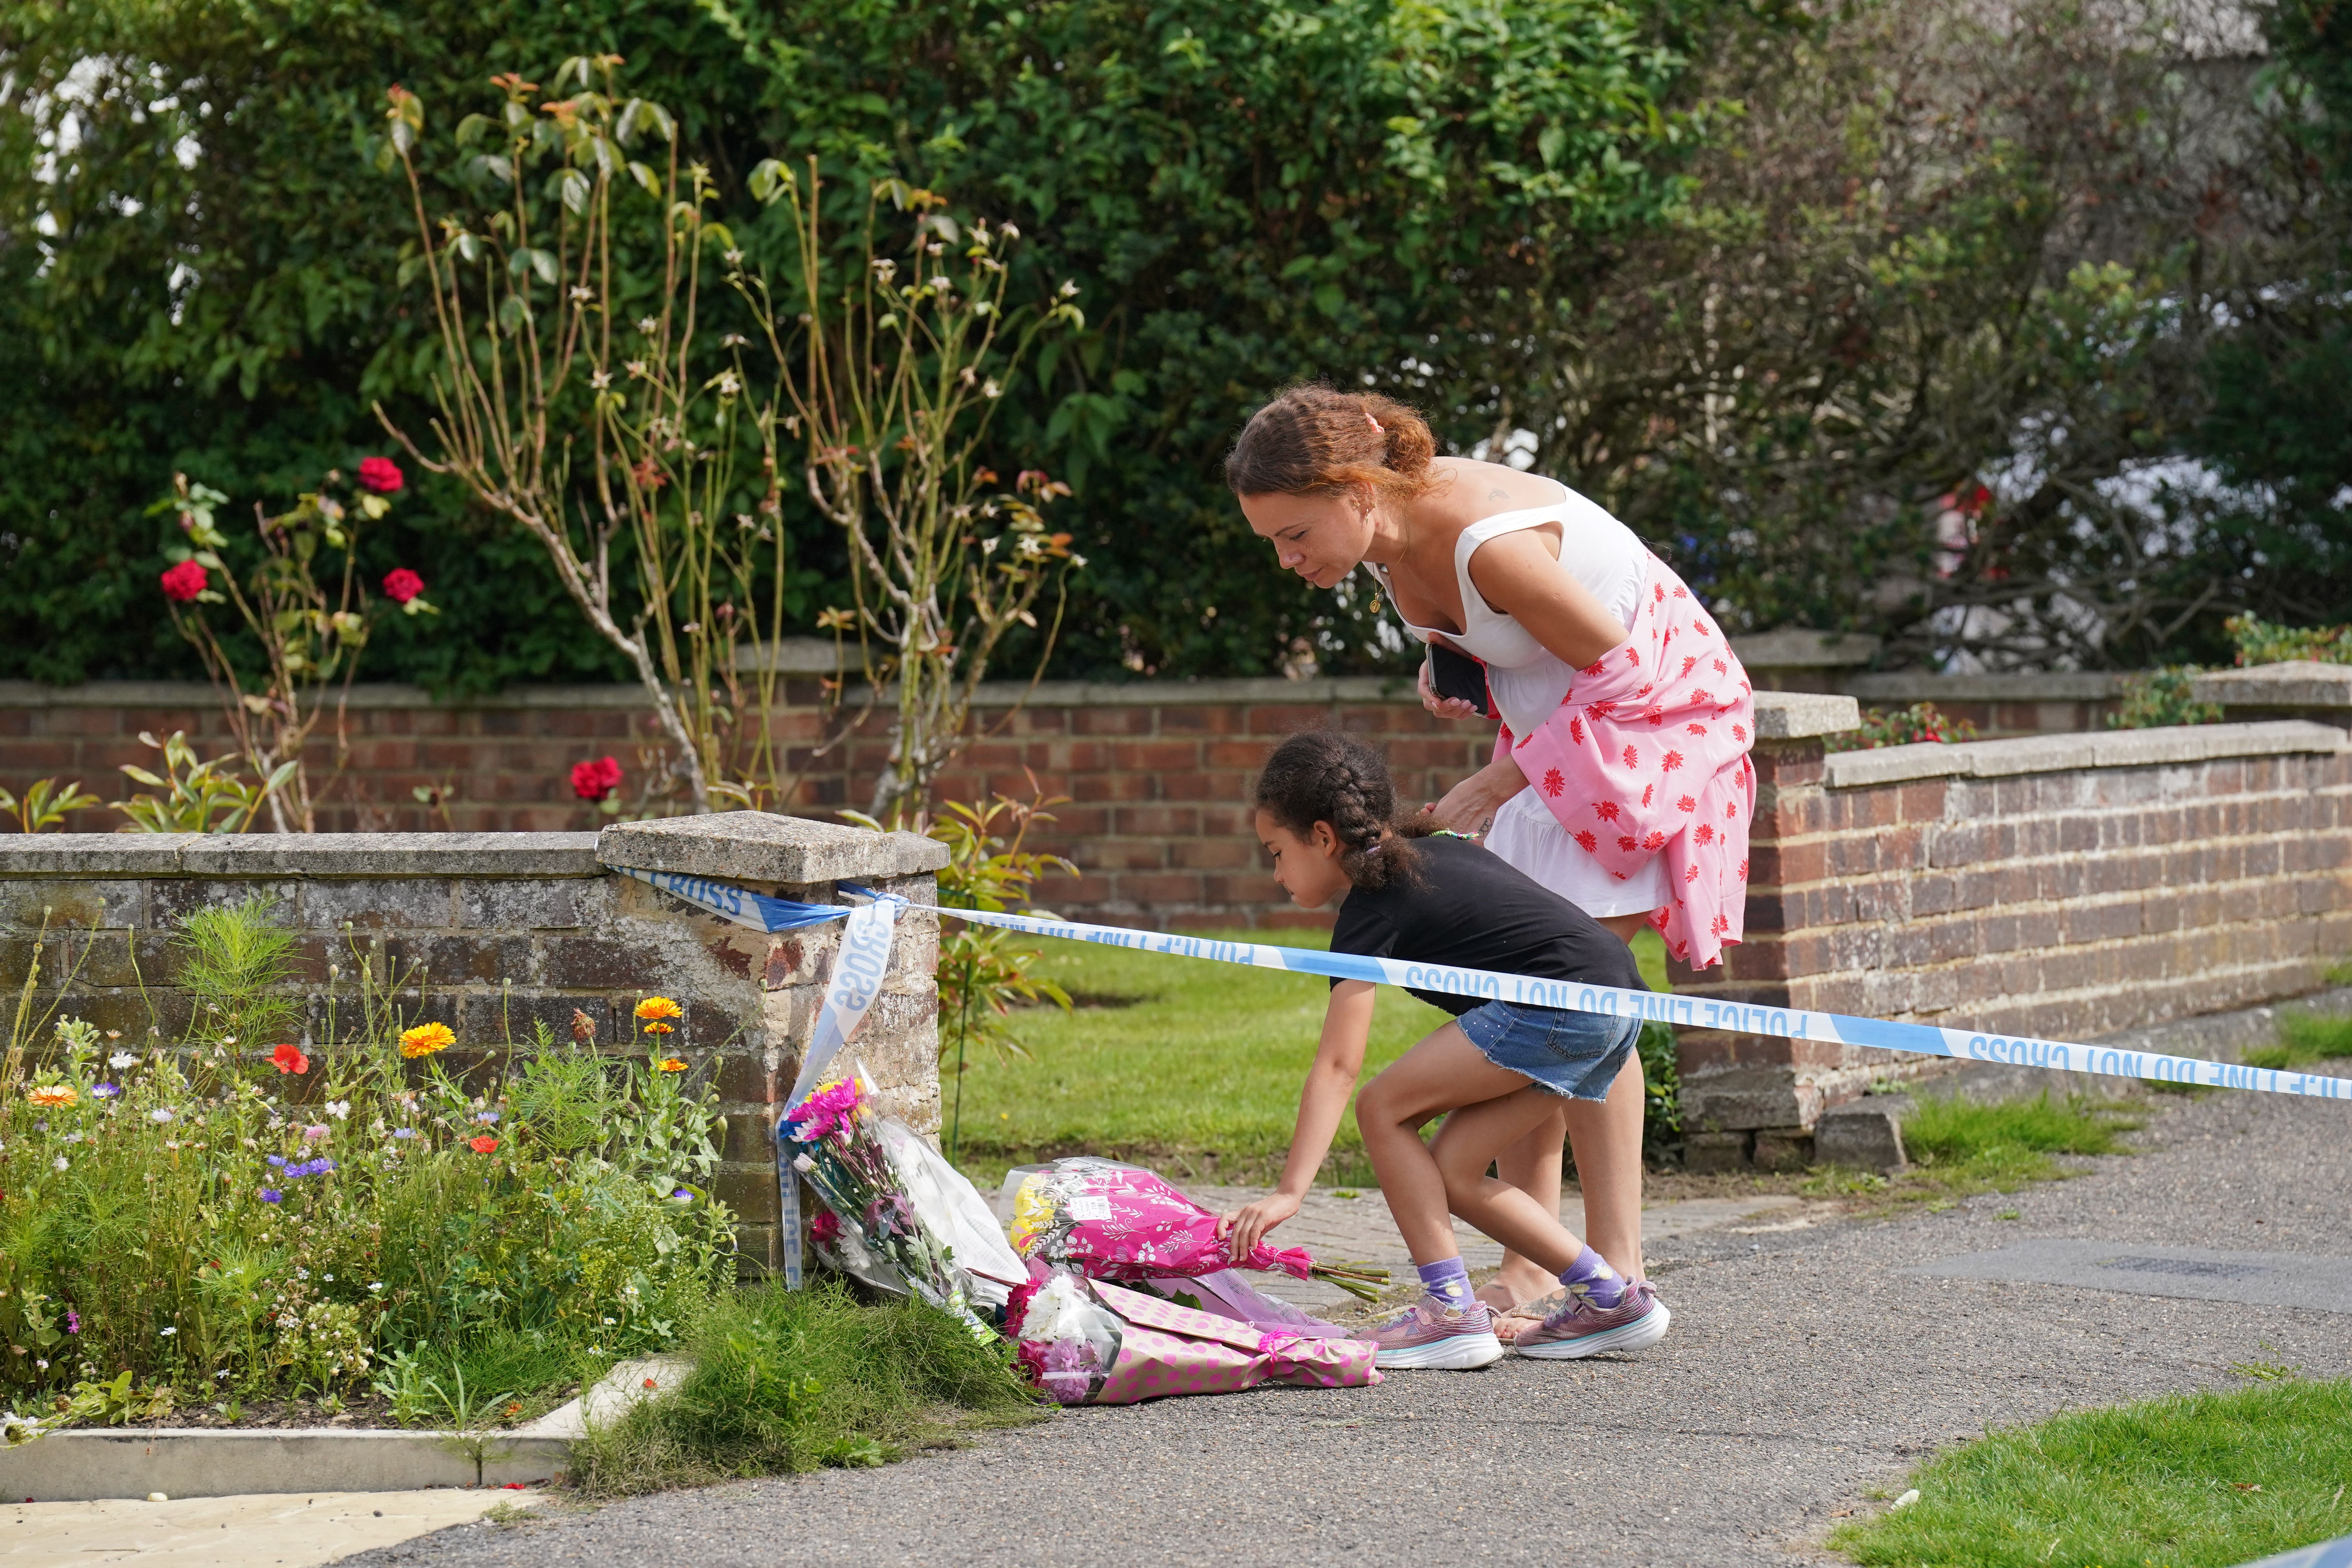 Neighbours lay flowers for Sara outside her home